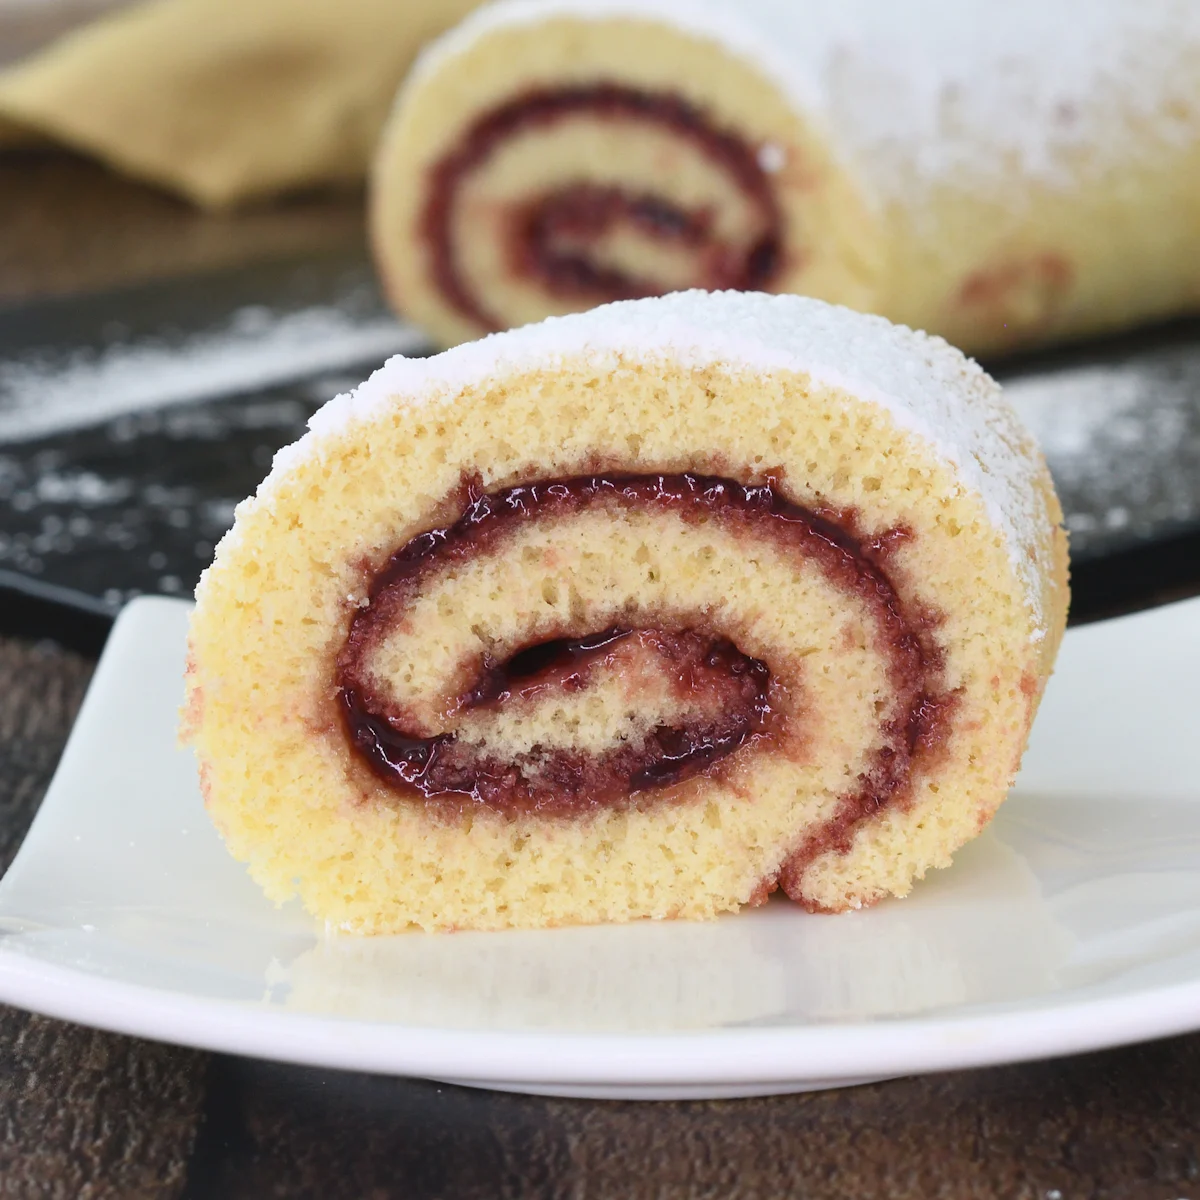 JELLY ROLL PAN / SWISS ROLL / ROULADE BAKING PAN